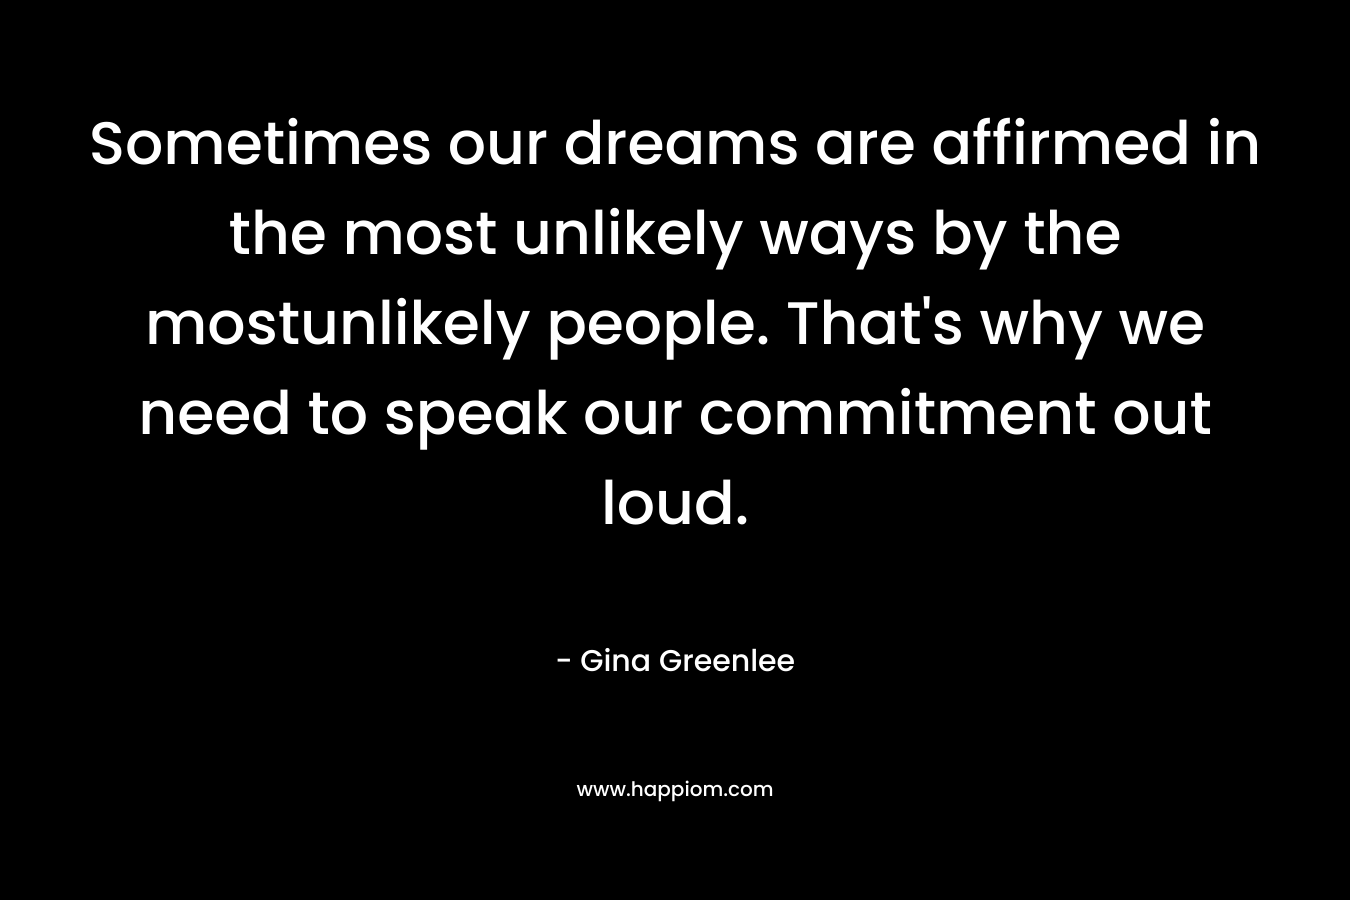 Sometimes our dreams are affirmed in the most unlikely ways by the mostunlikely people. That's why we need to speak our commitment out loud.